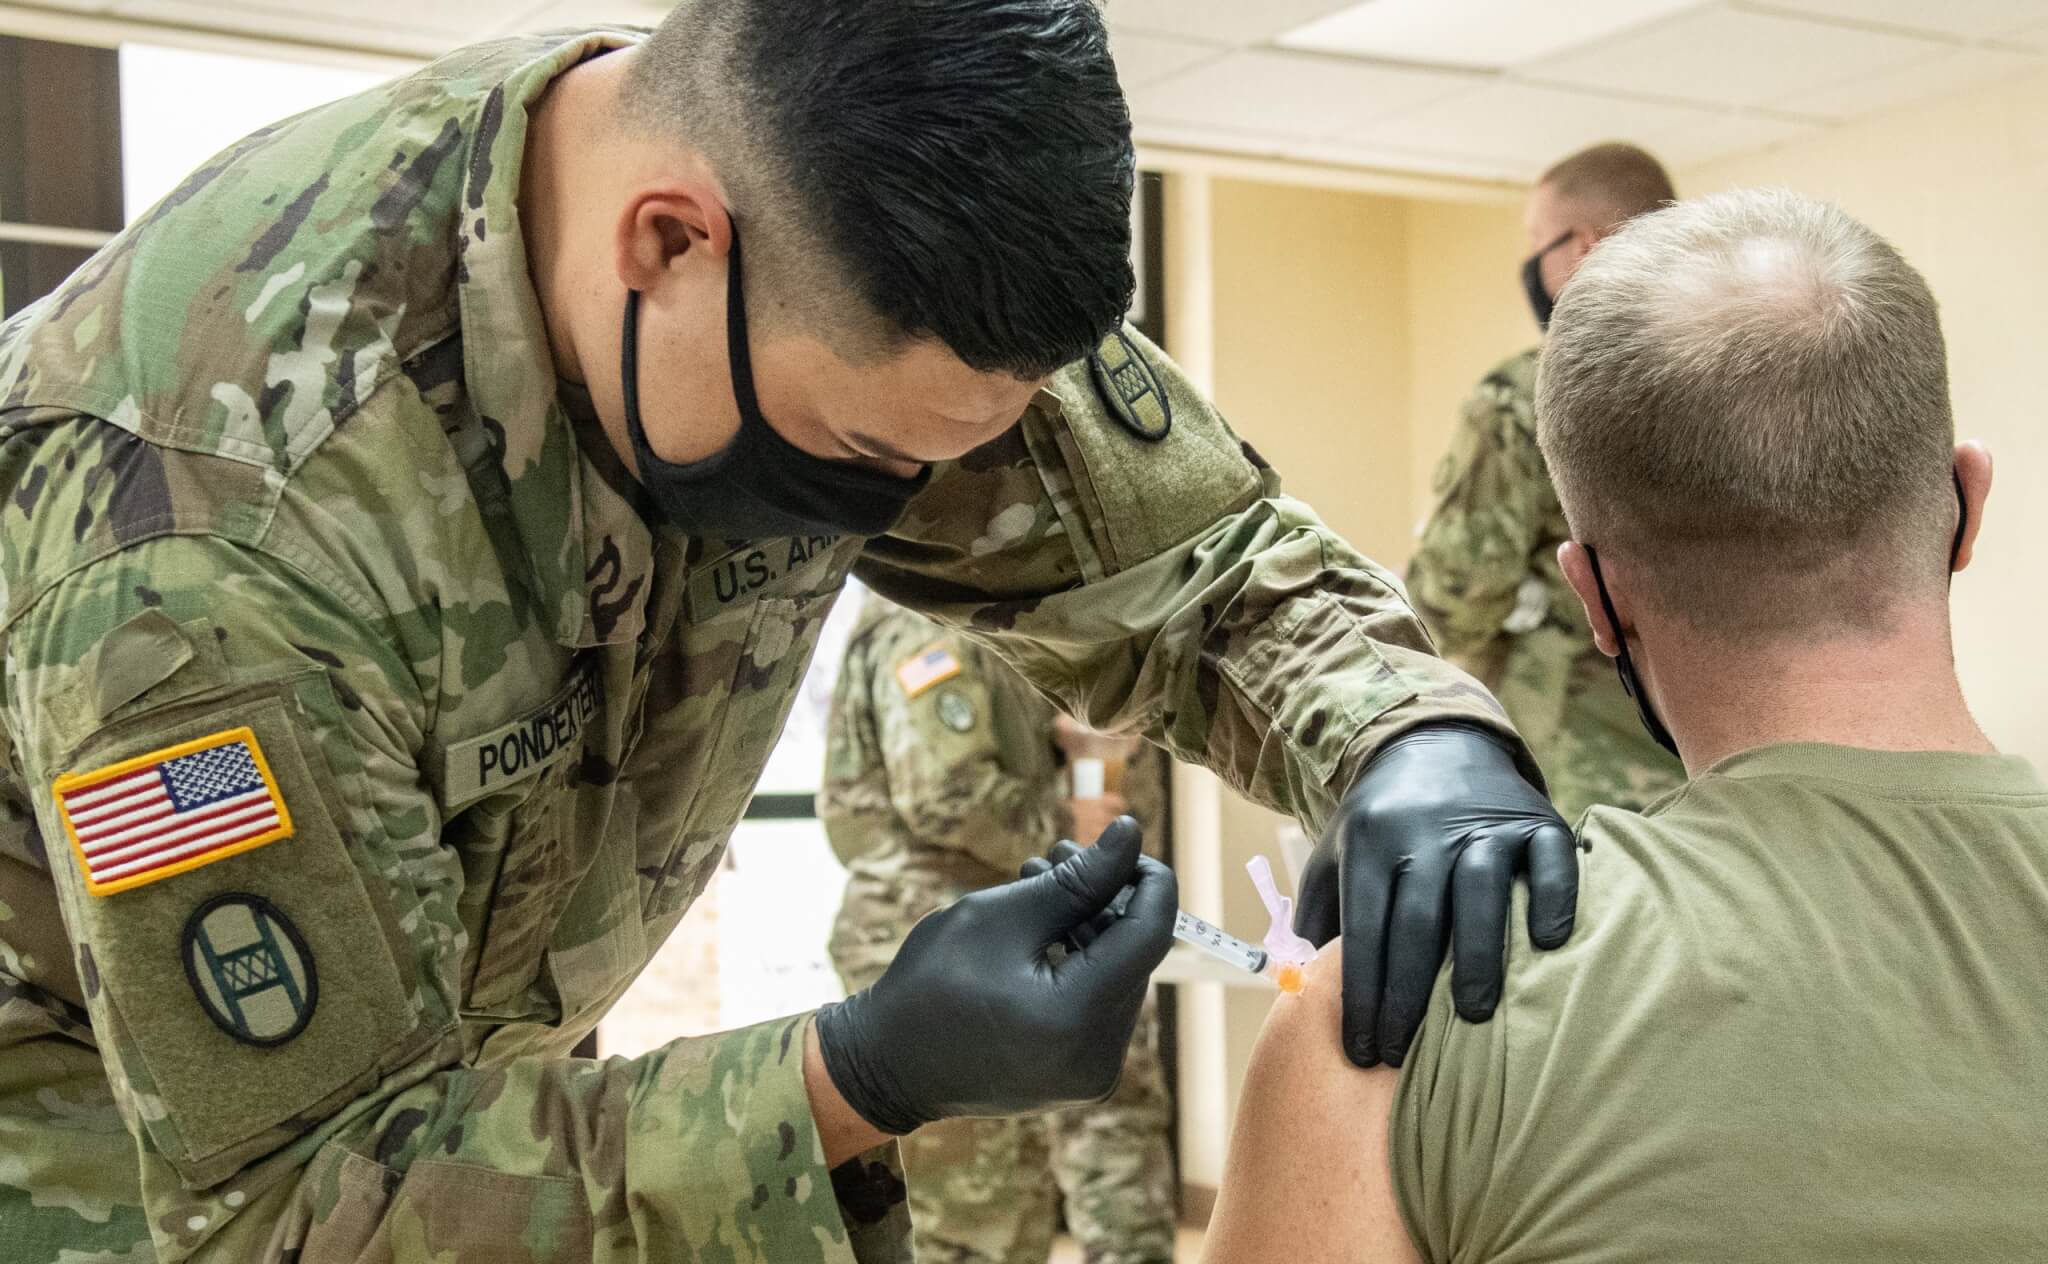 Members of the West Virginia National Guard conduct and participate in a COVID-19 vaccination clinic at Joint Forces Headquarters in Charleston, West Virginia. U.S. Army National Guard photo by Edwin L Wriston.